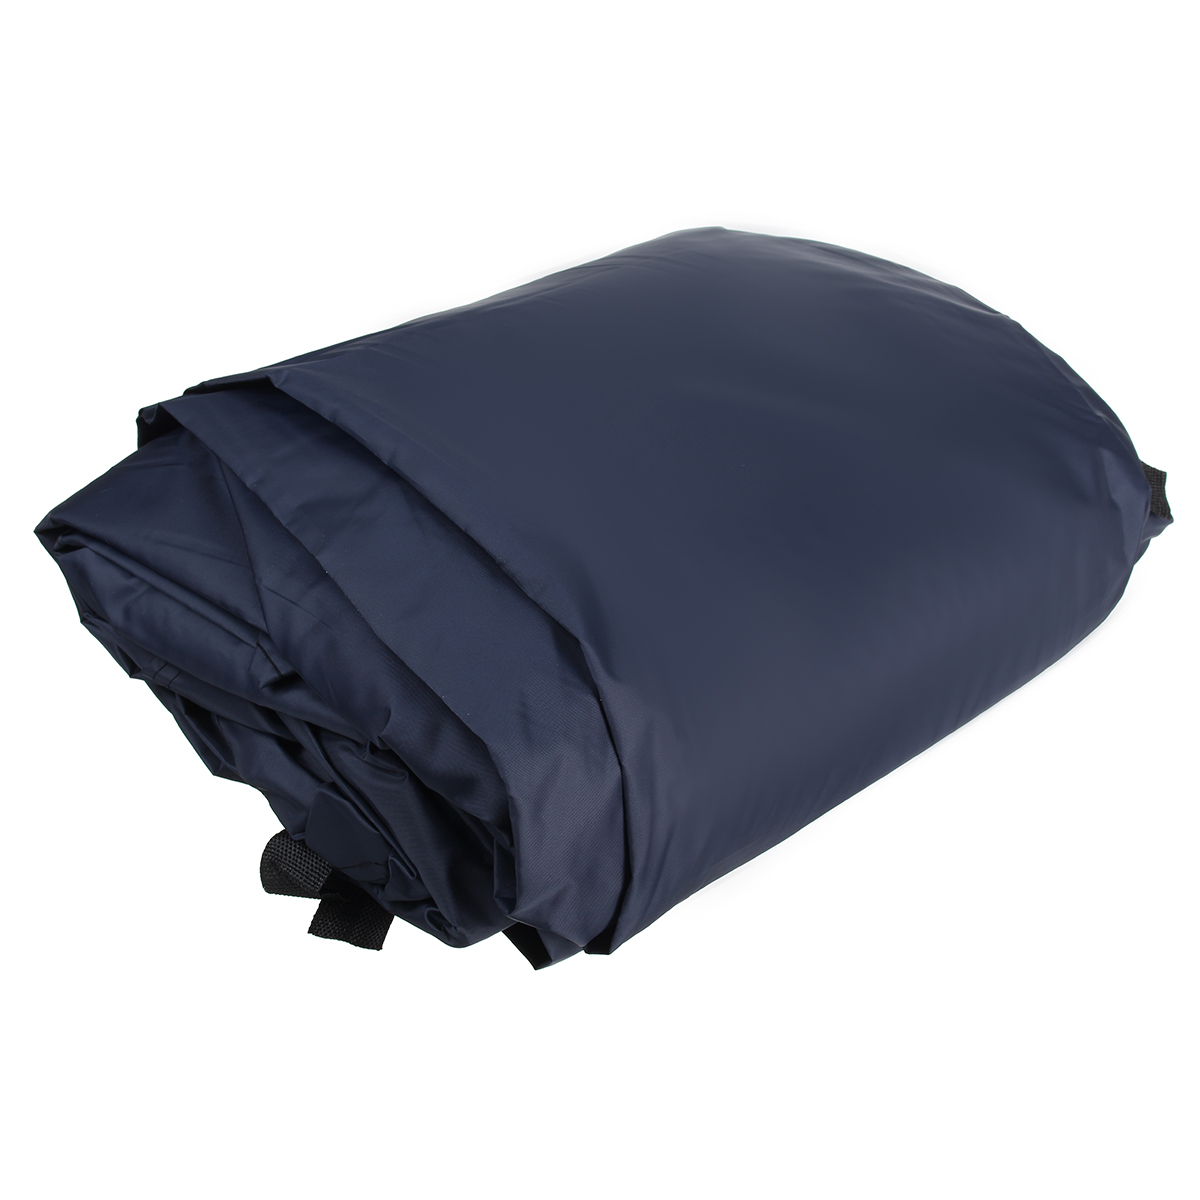 L 4.85X1.9X1.85M 210T Waterproof Full Car Cover Outdoor Dustproof Sunscreen Rain and Snow for SUV